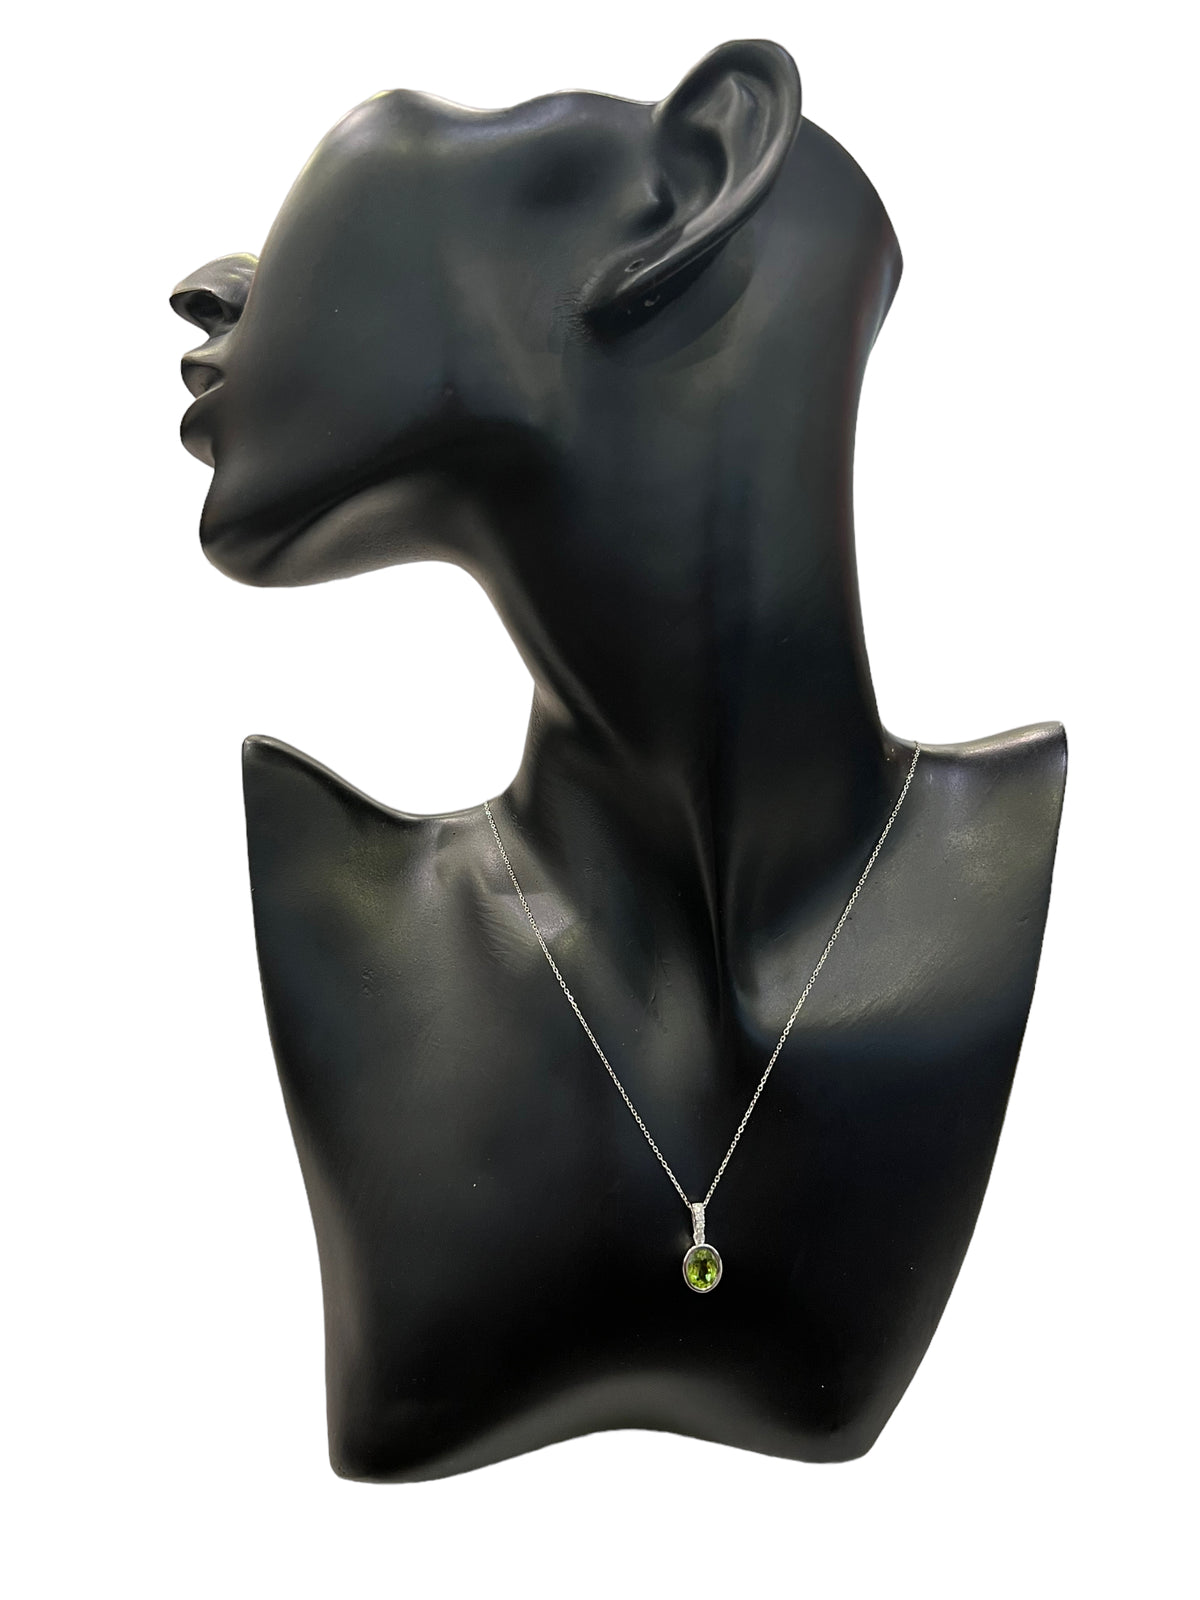 14K White Gold 1.35cttw Peridot and 0.06cttw Diamond Necklace - 18 Inches